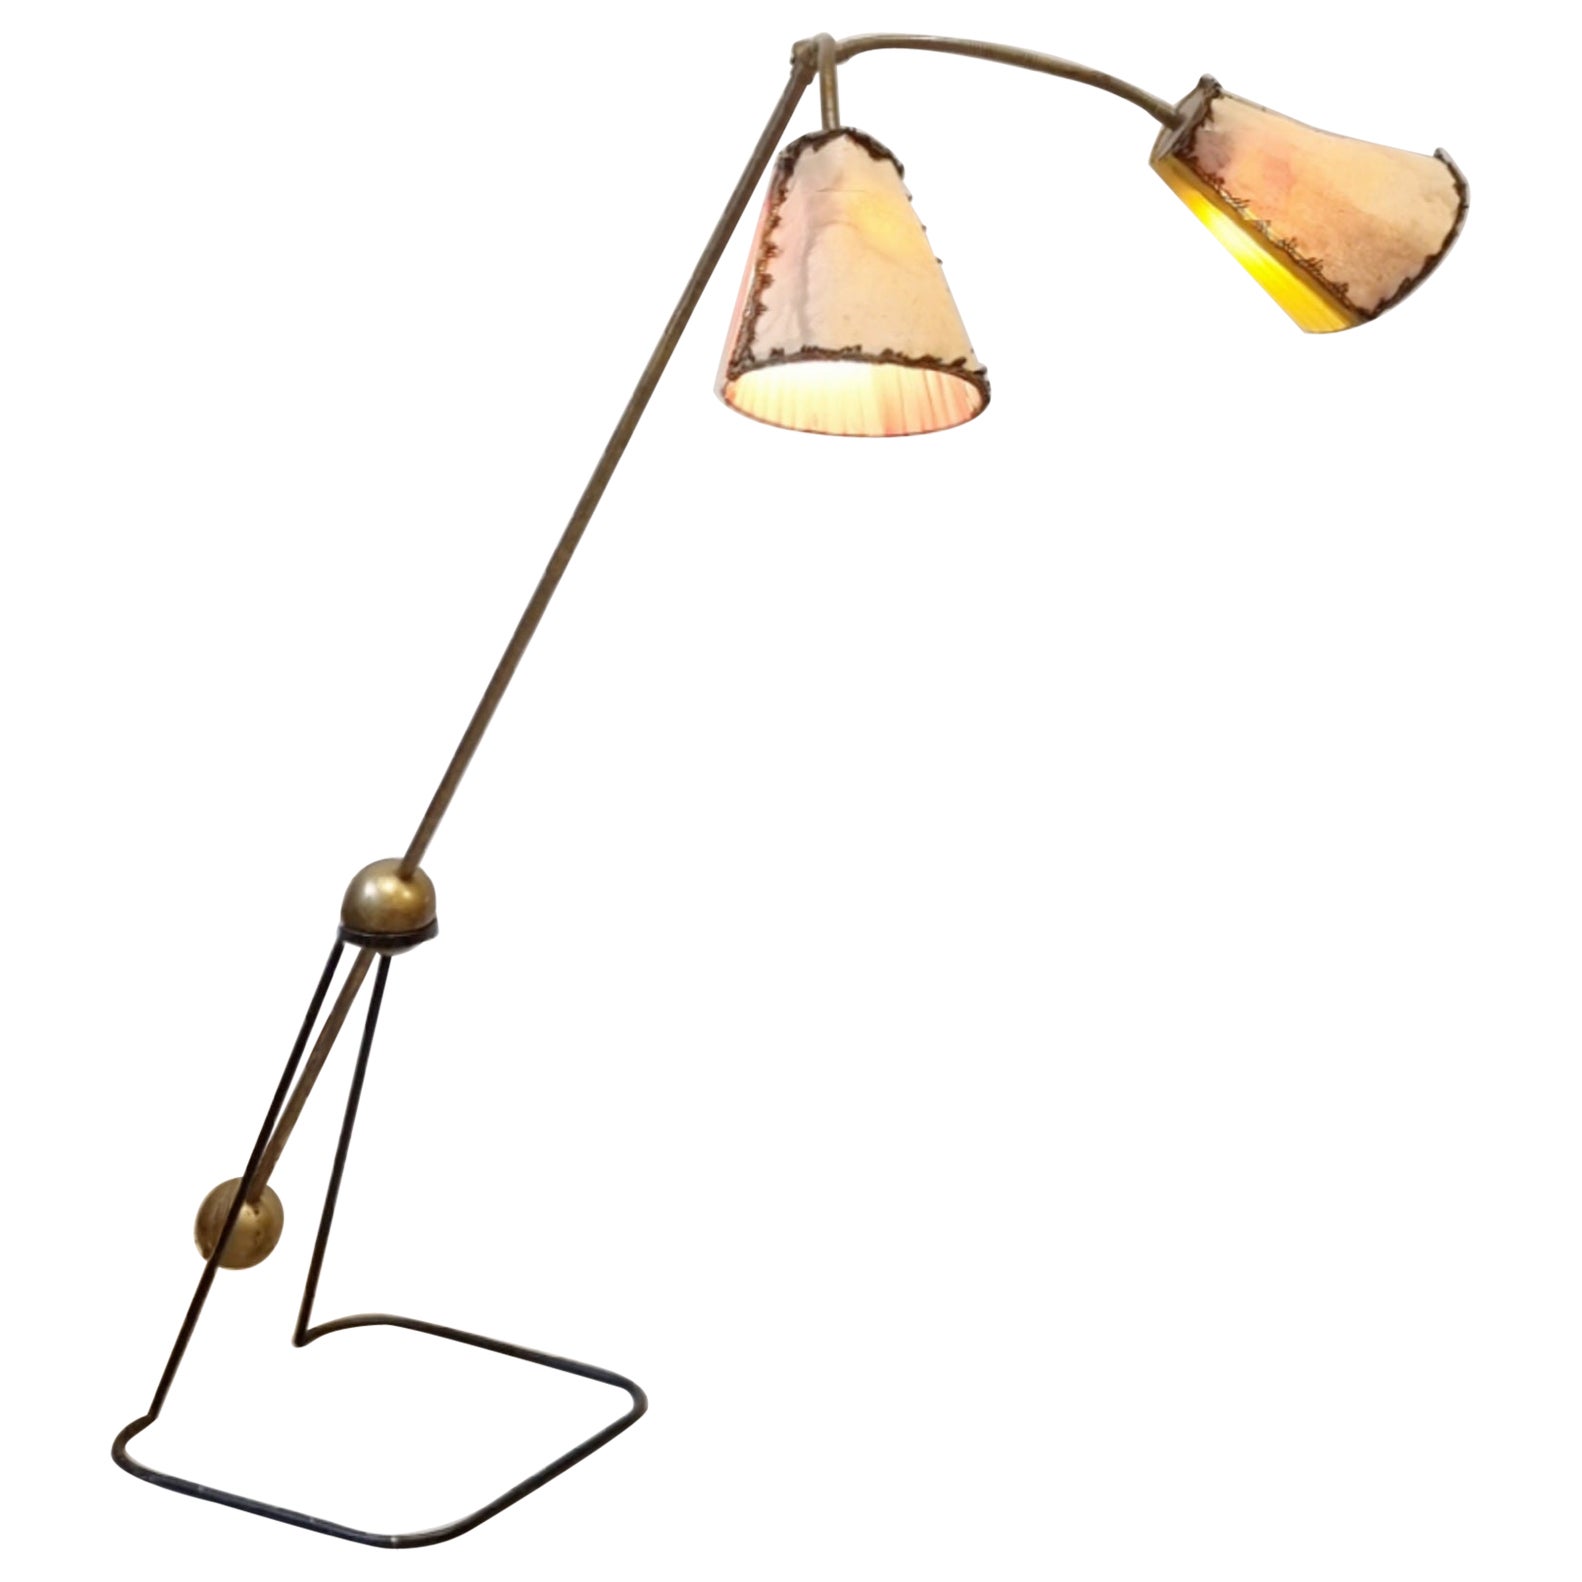 Floor Lamp in brass and lacquered steel, Luci Milano, MidCentury Modern, Italian